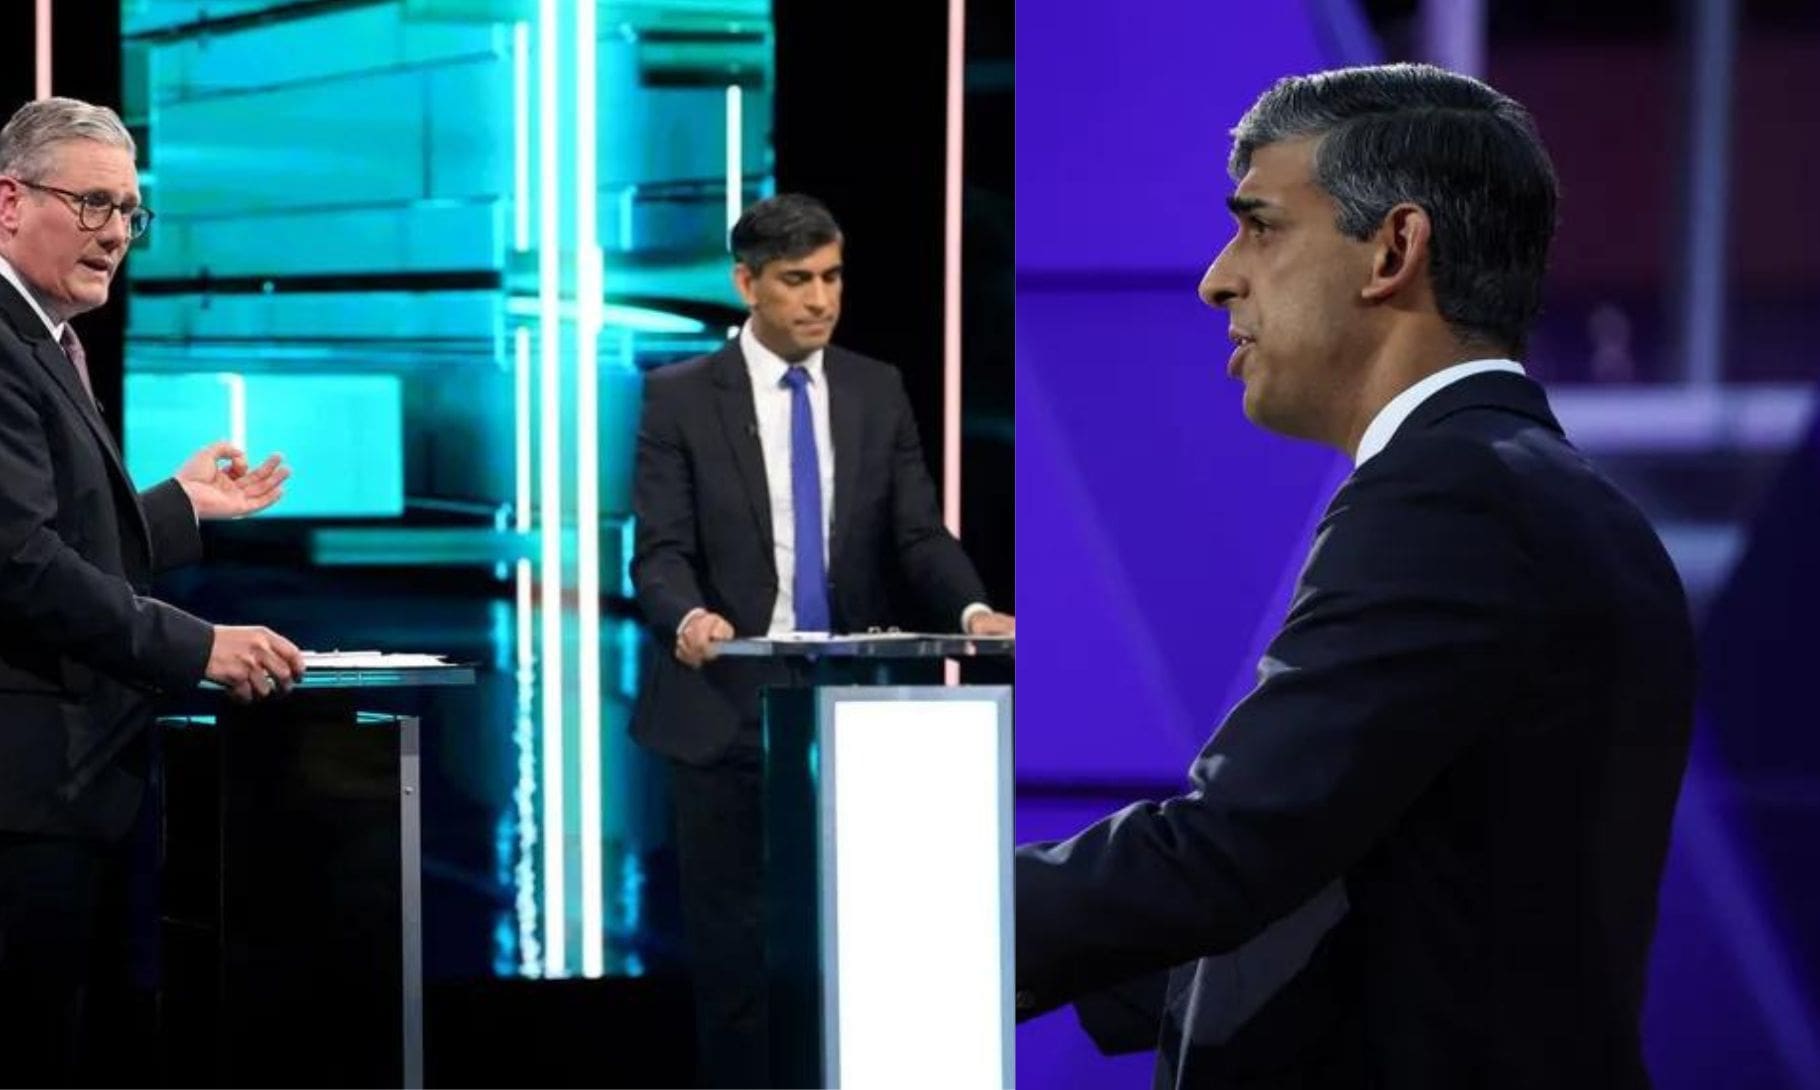 UK Elections: Rishi Sunak Won The Debate But Labour Party Might Still Win The Elections